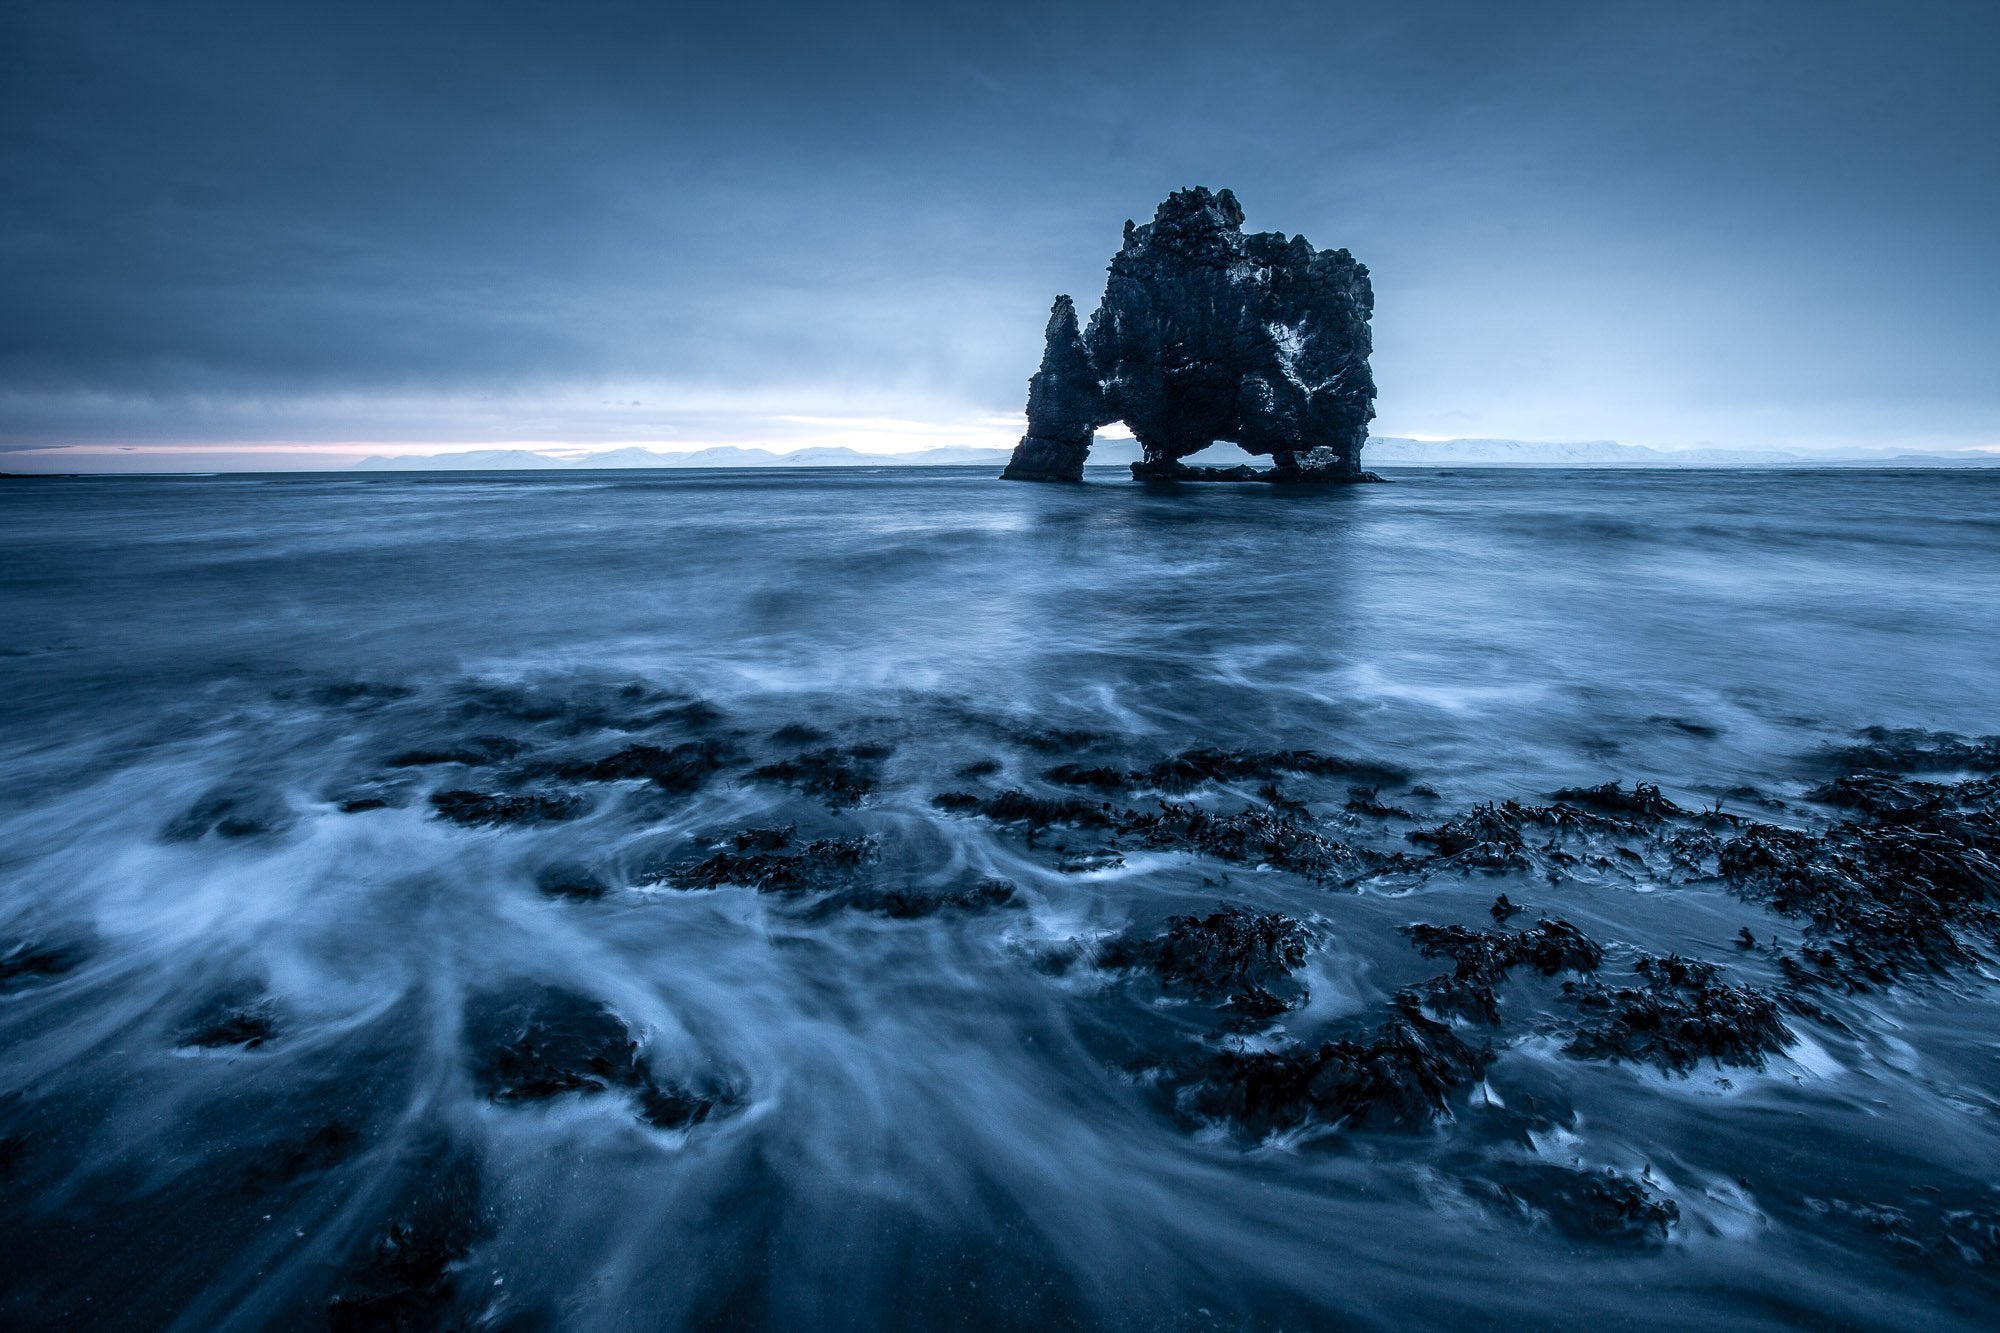 A large dark black standing stone in the sea, Iceland #9